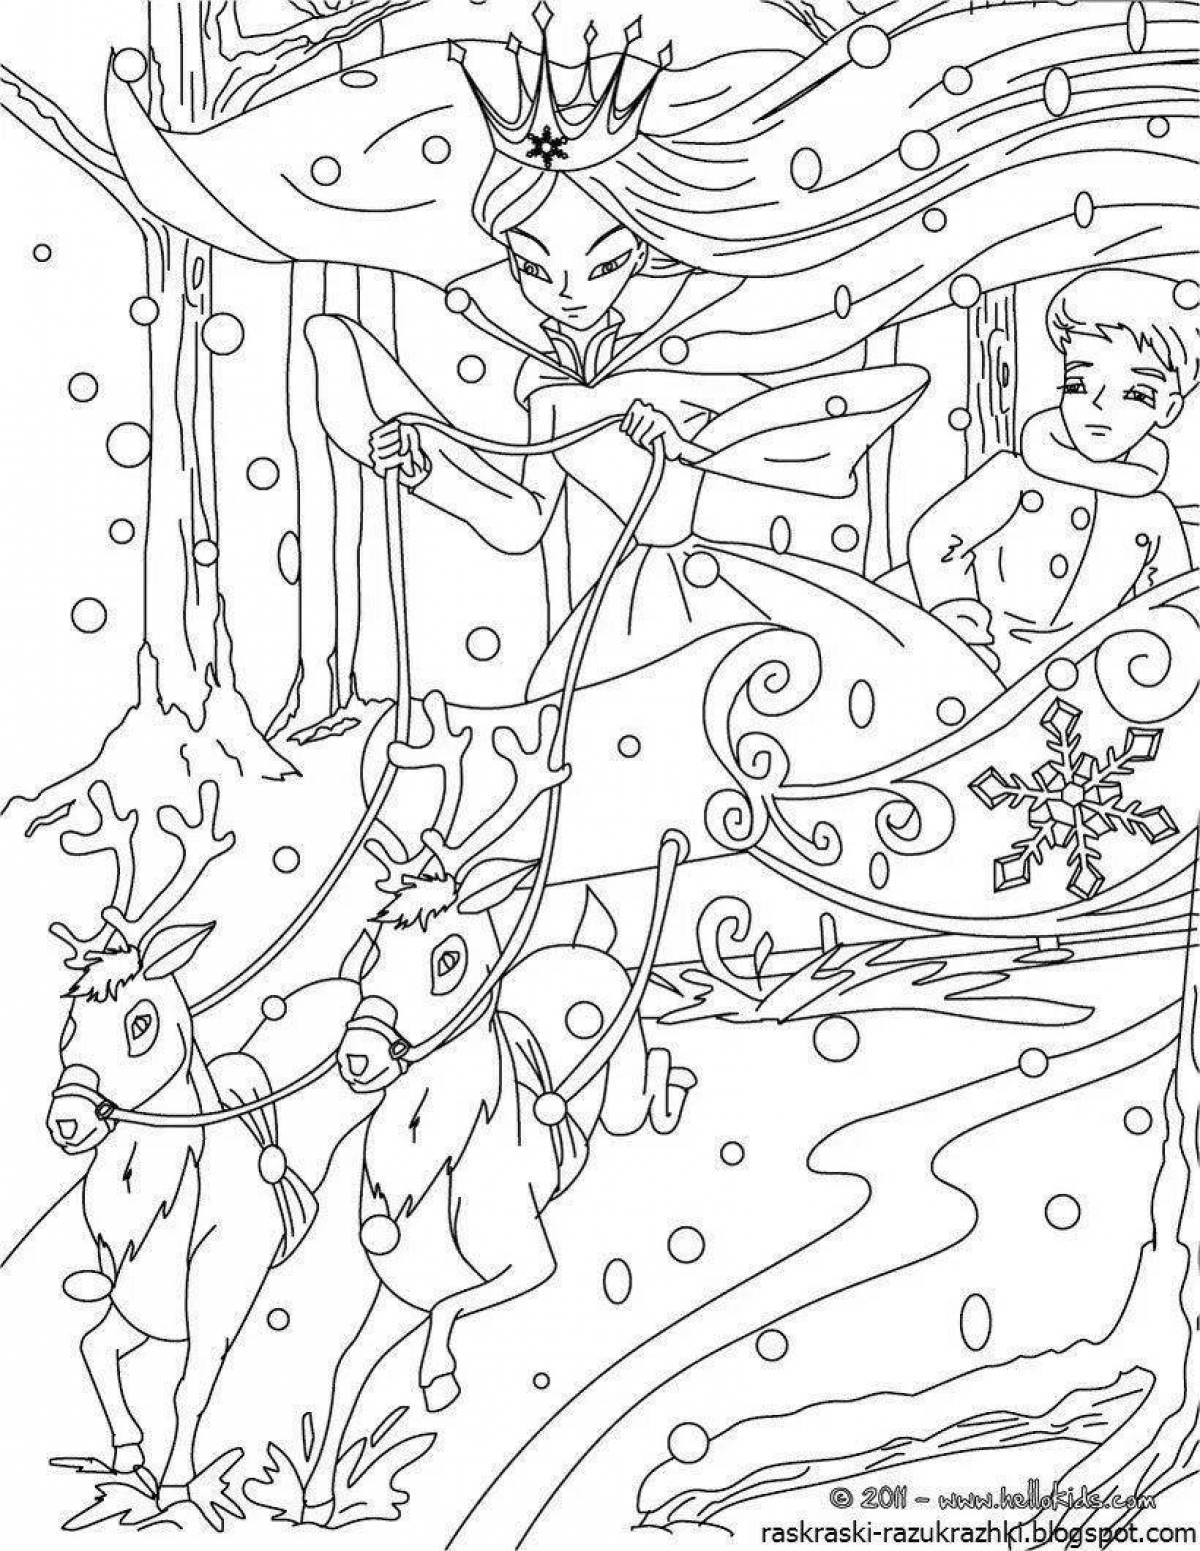 Glowing snow queen coloring book for girls